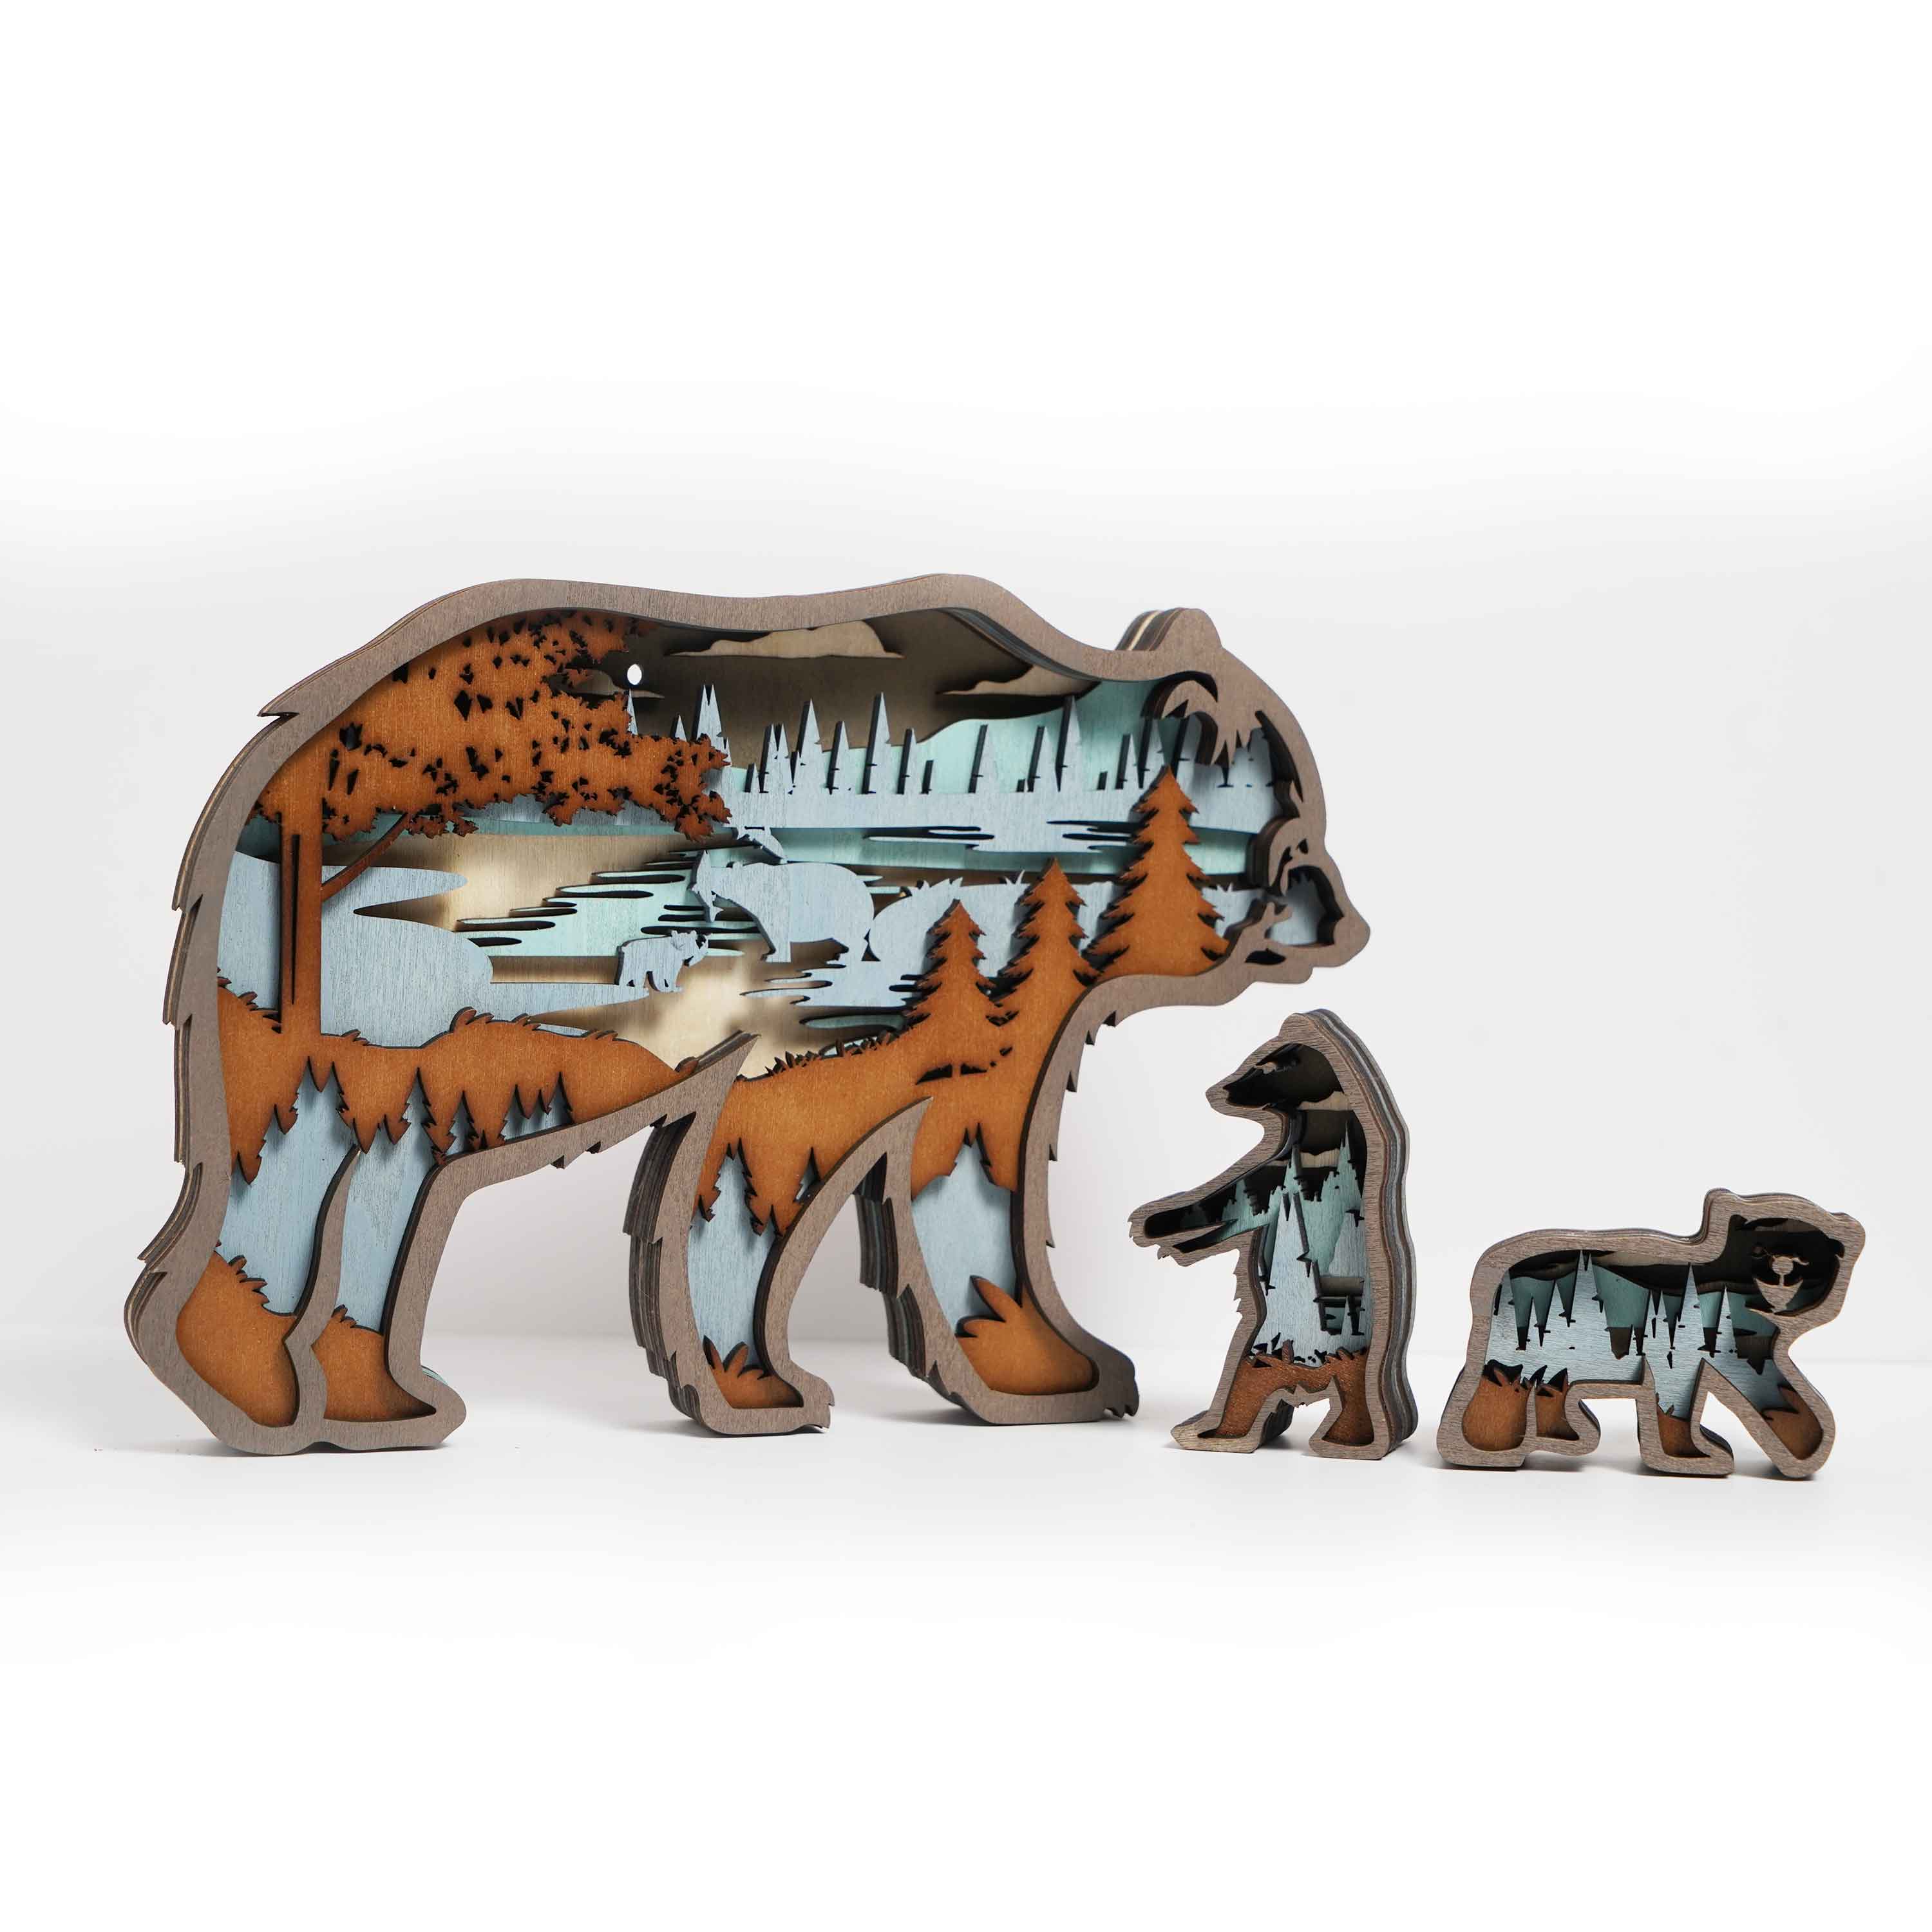 New Arrivals✨-Grizzly bears Carving Handcraft Gift